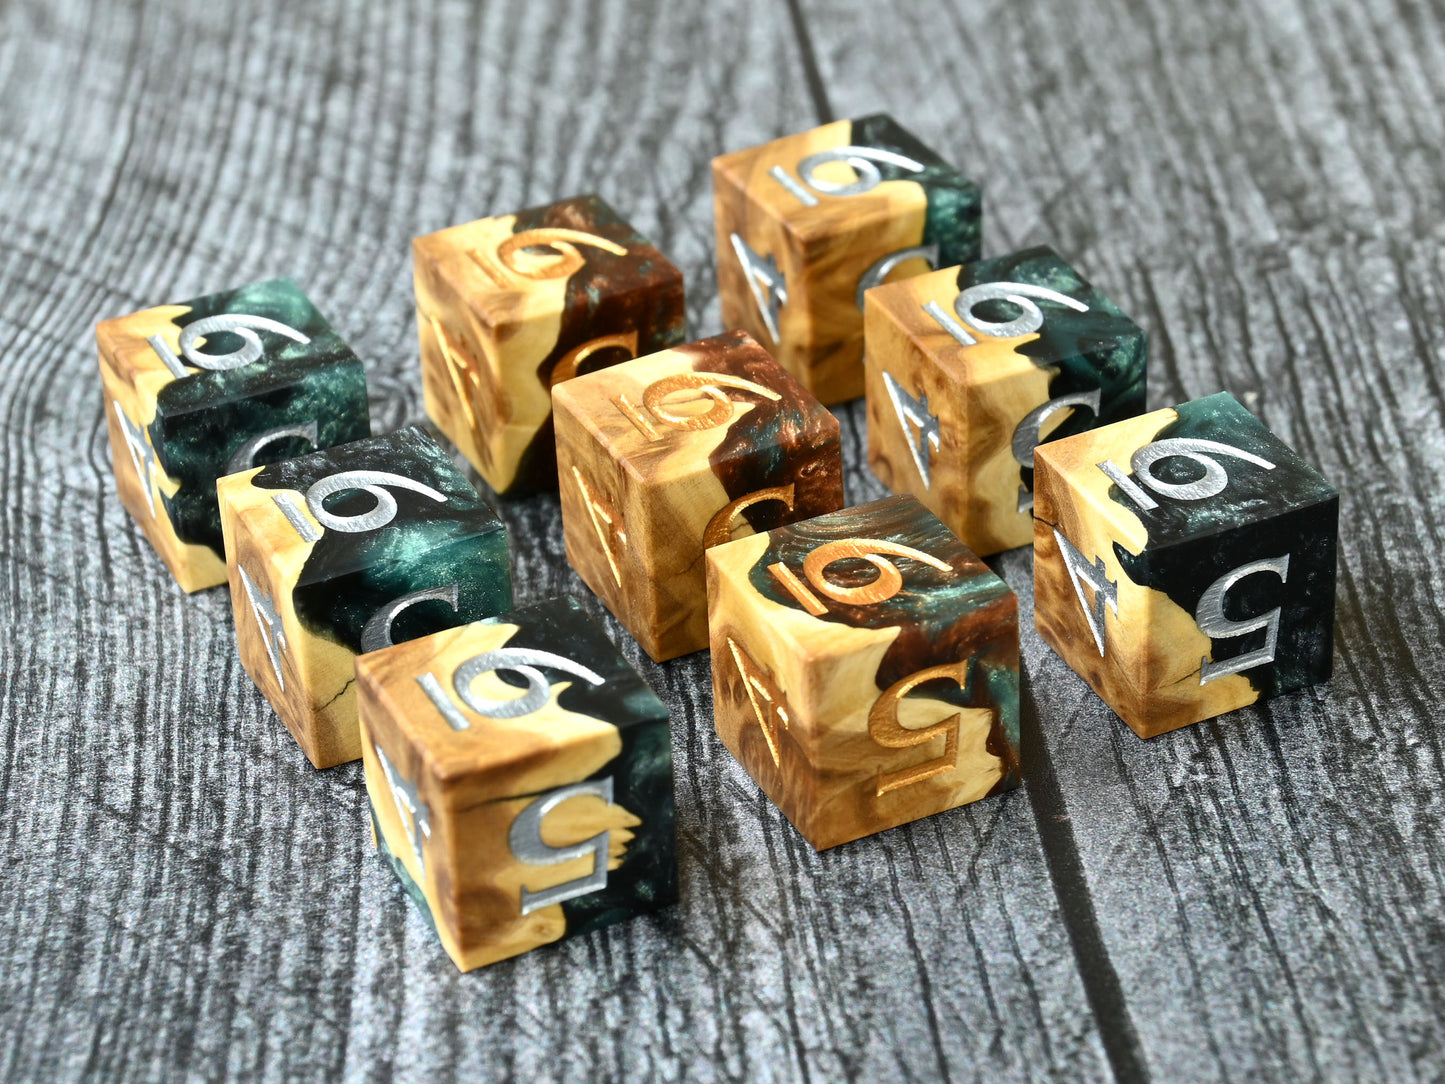 9d6 dice set made from brown mallee burl wood and resin for D&D ttrpg